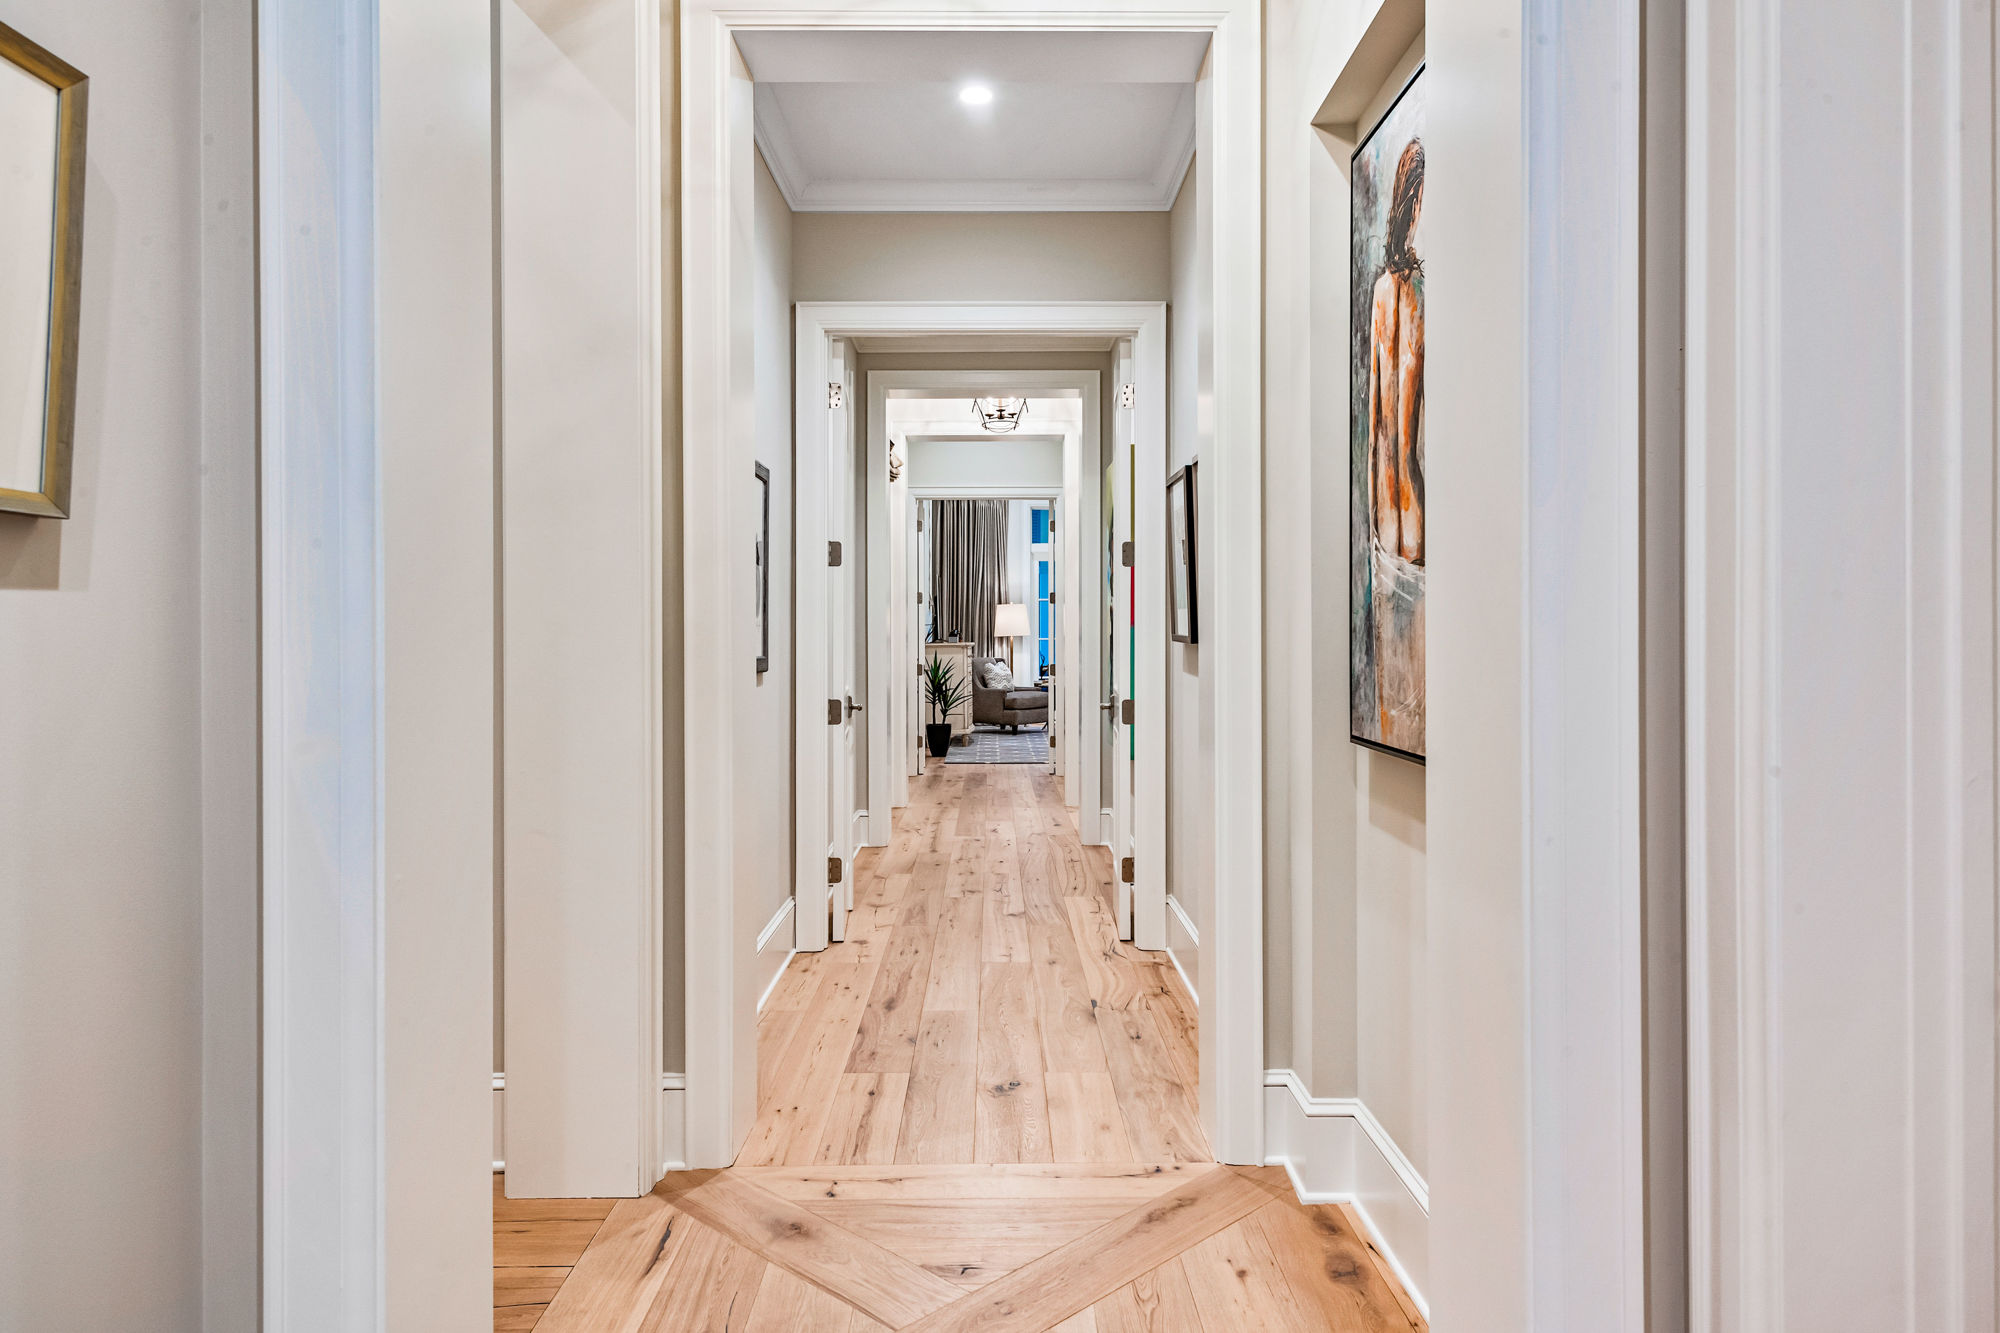 Wooden floors add warmth and showcase the home’s West Indian inspiration. Here, a hallway connects the master bedroom with an office and exercise room.